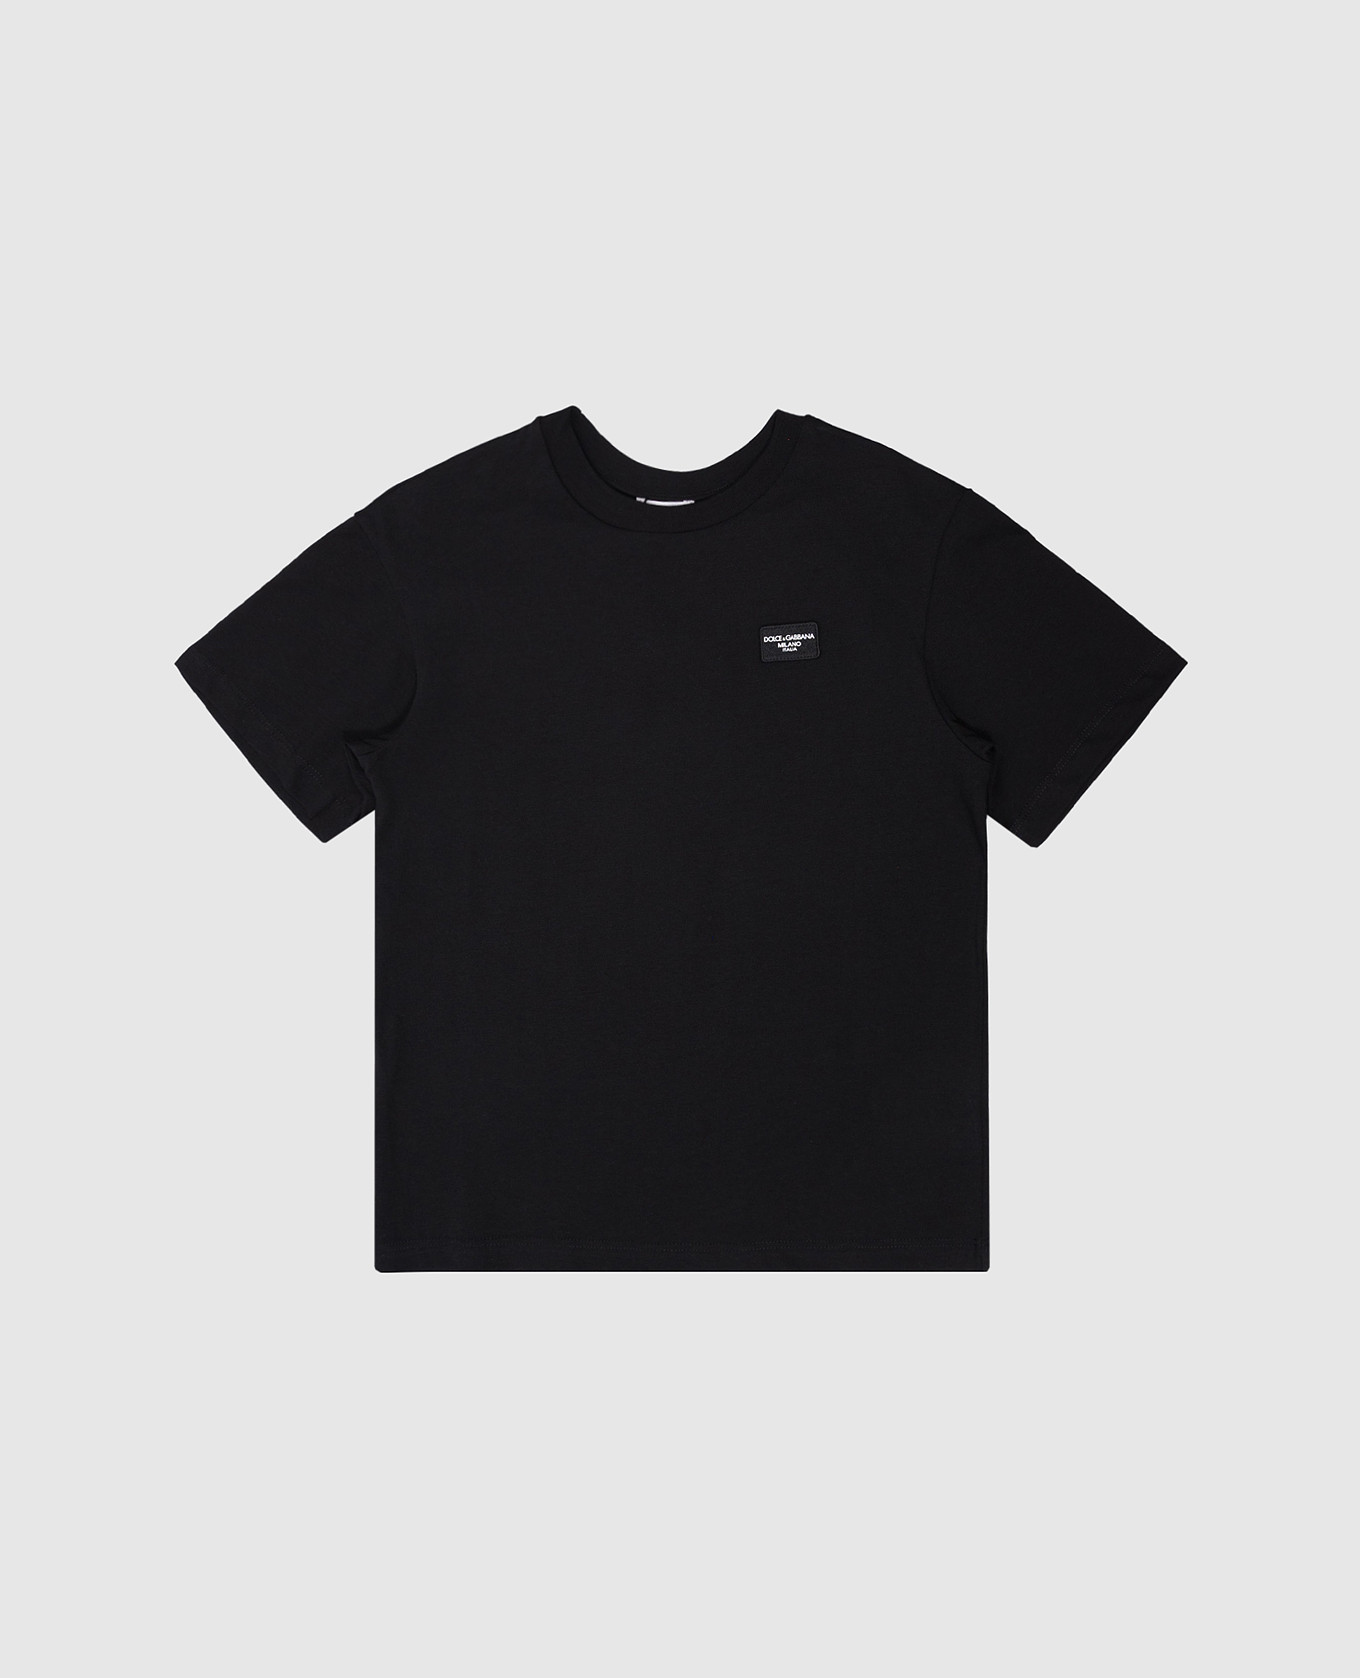 Children's black t-shirt with logo patch